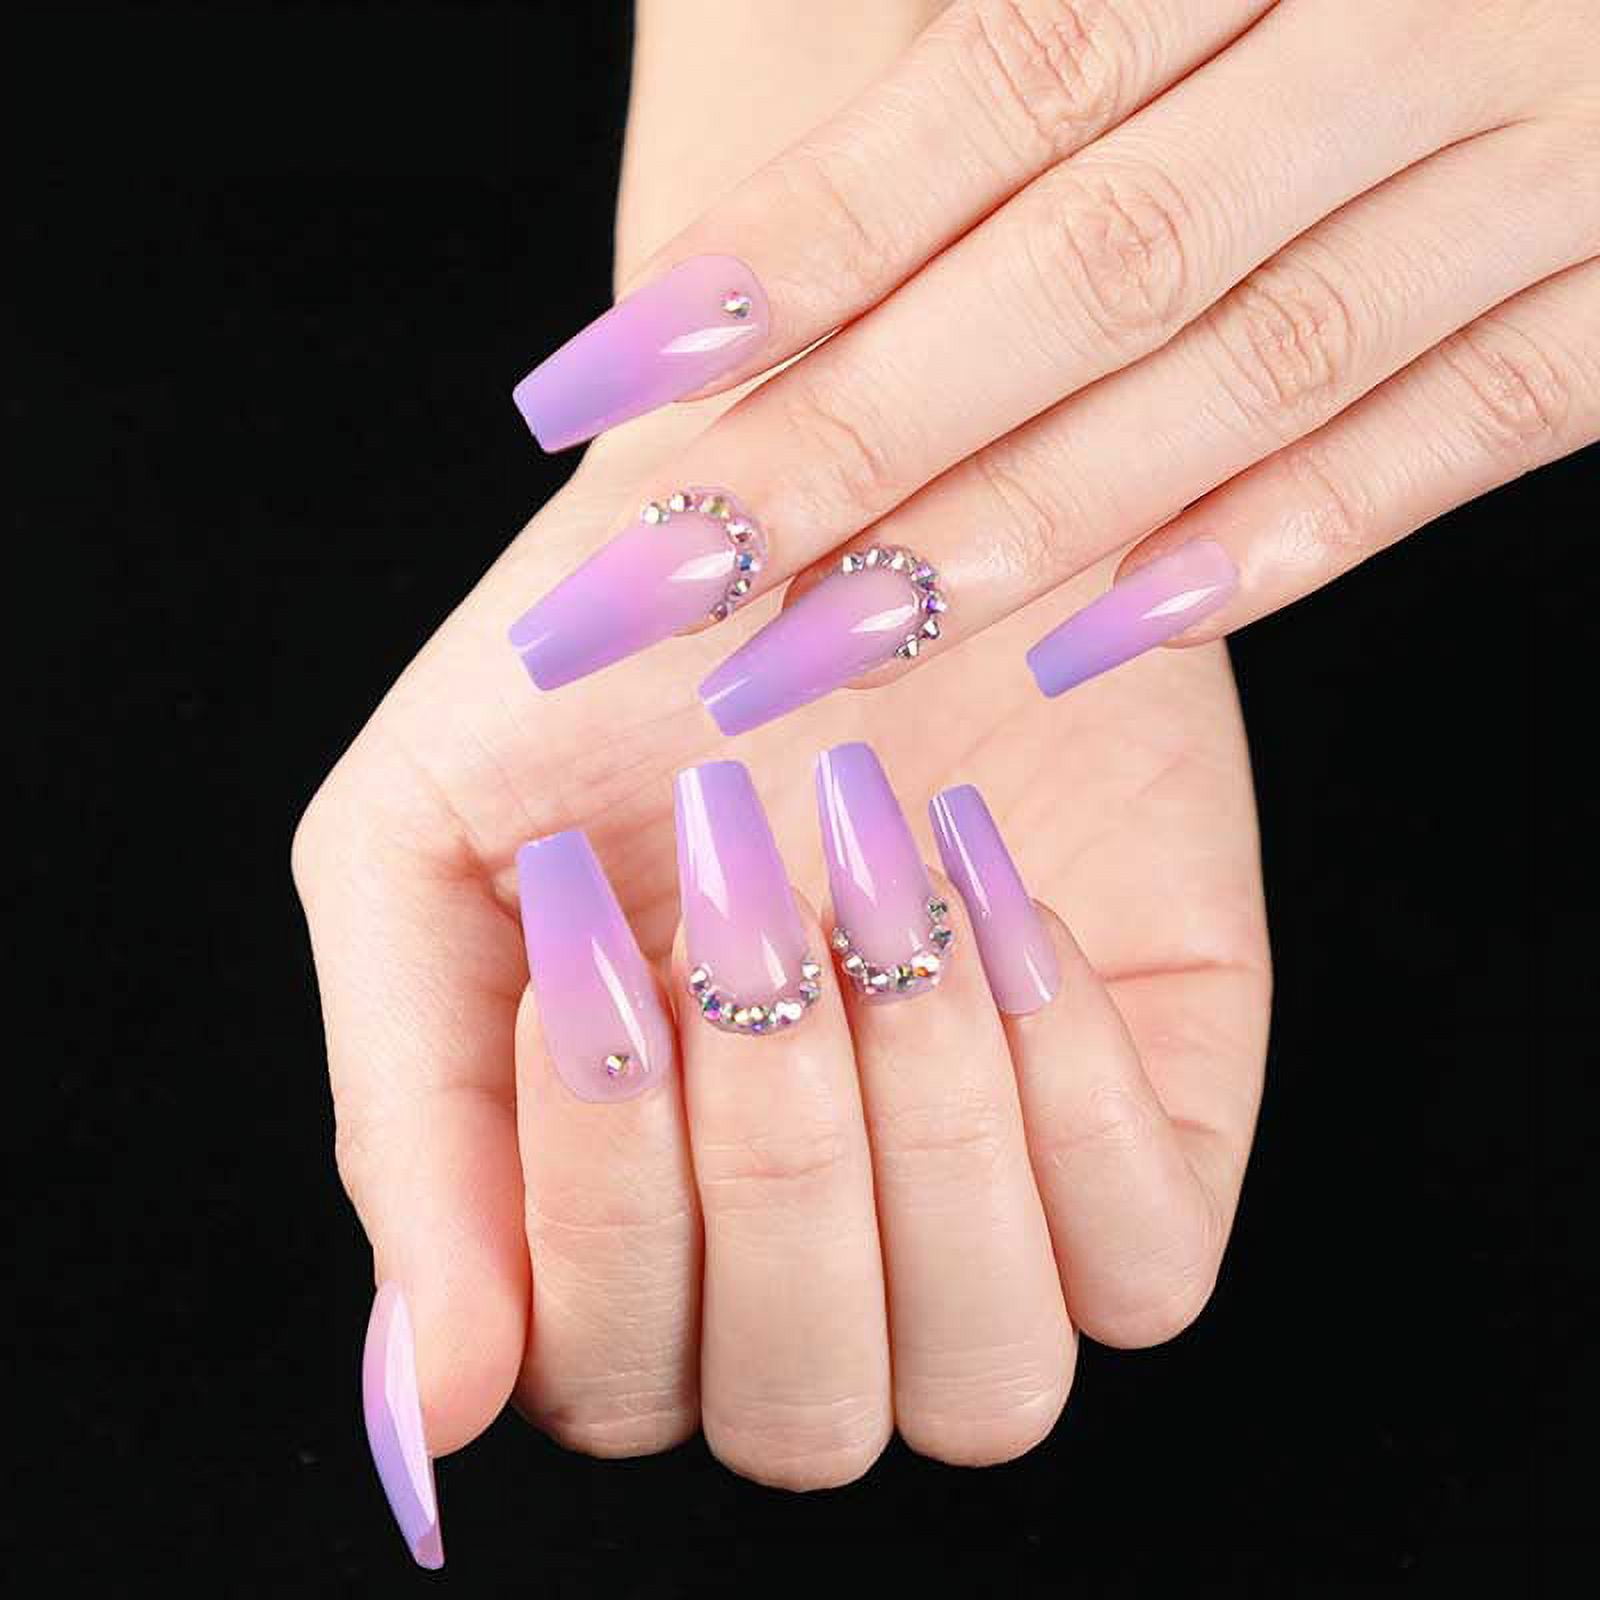 60 Acrylic Nails to Elevate Your Fashion Style!